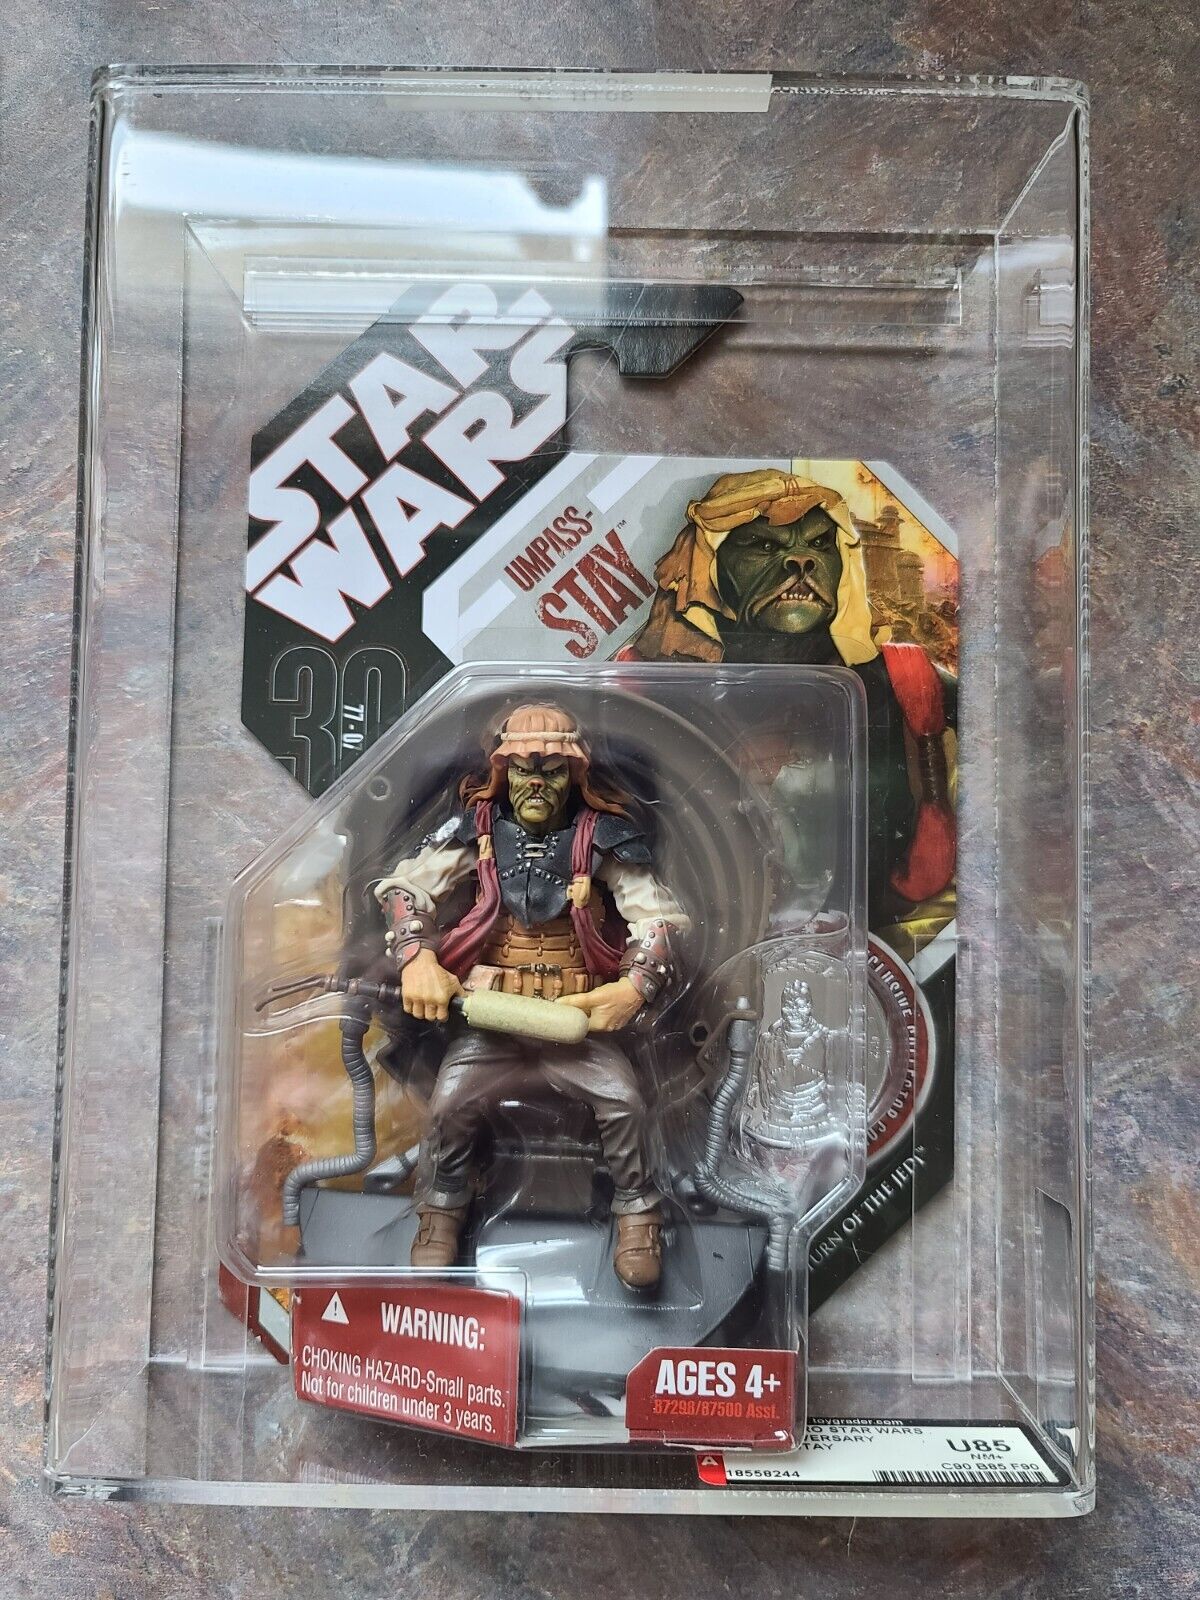 Umpass Stay Jabba\'s # 27  Stat Wars 30th Ann With Coin (GRADED FIGURE U85 NM+ )